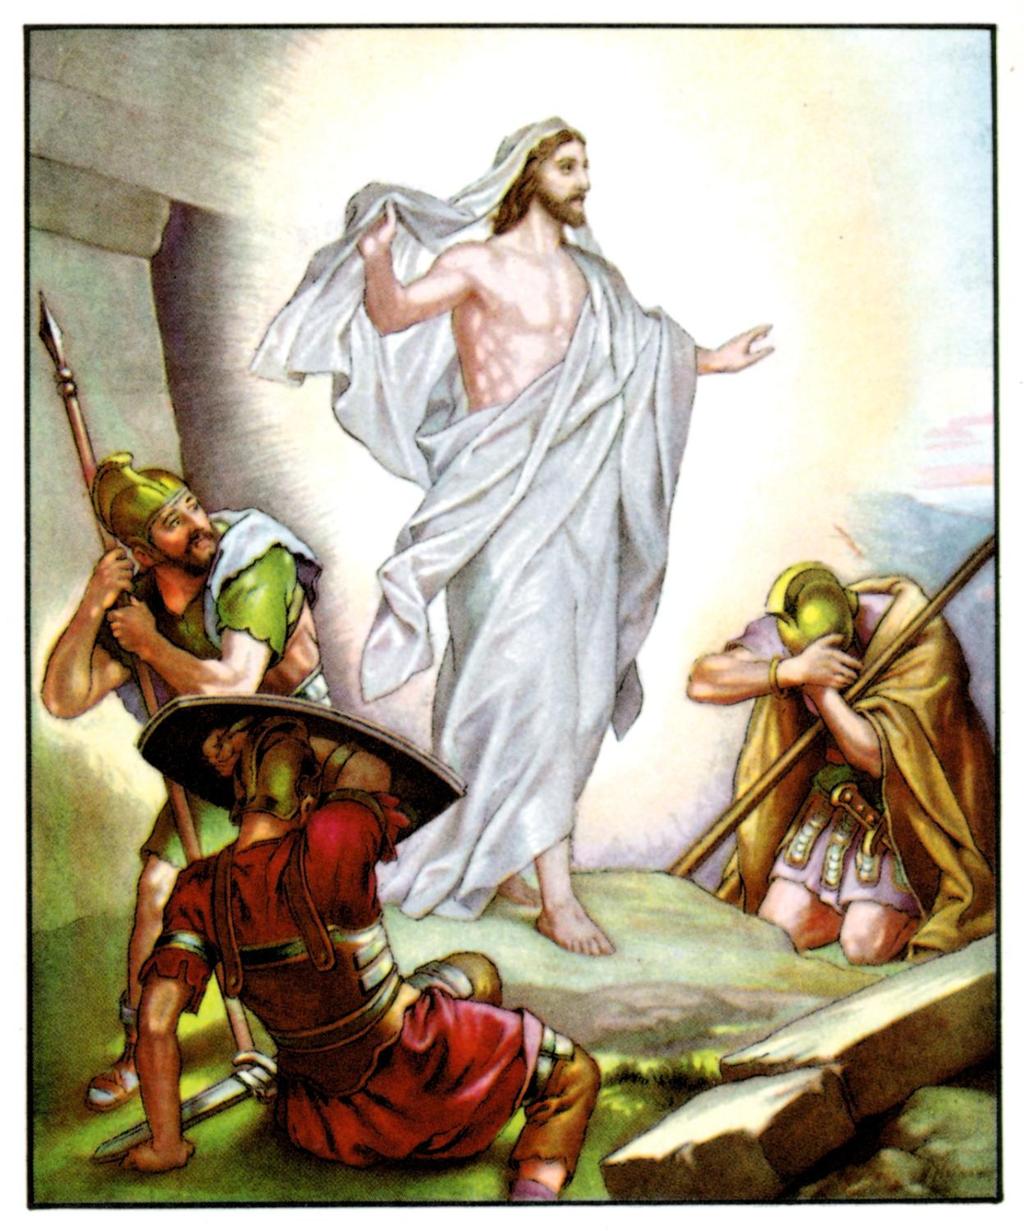 First Resurrection (Chapter 20) Before entering into this study, it is extremely important to understand exactly what the first resurrection is. Jesus was the first resurrection.